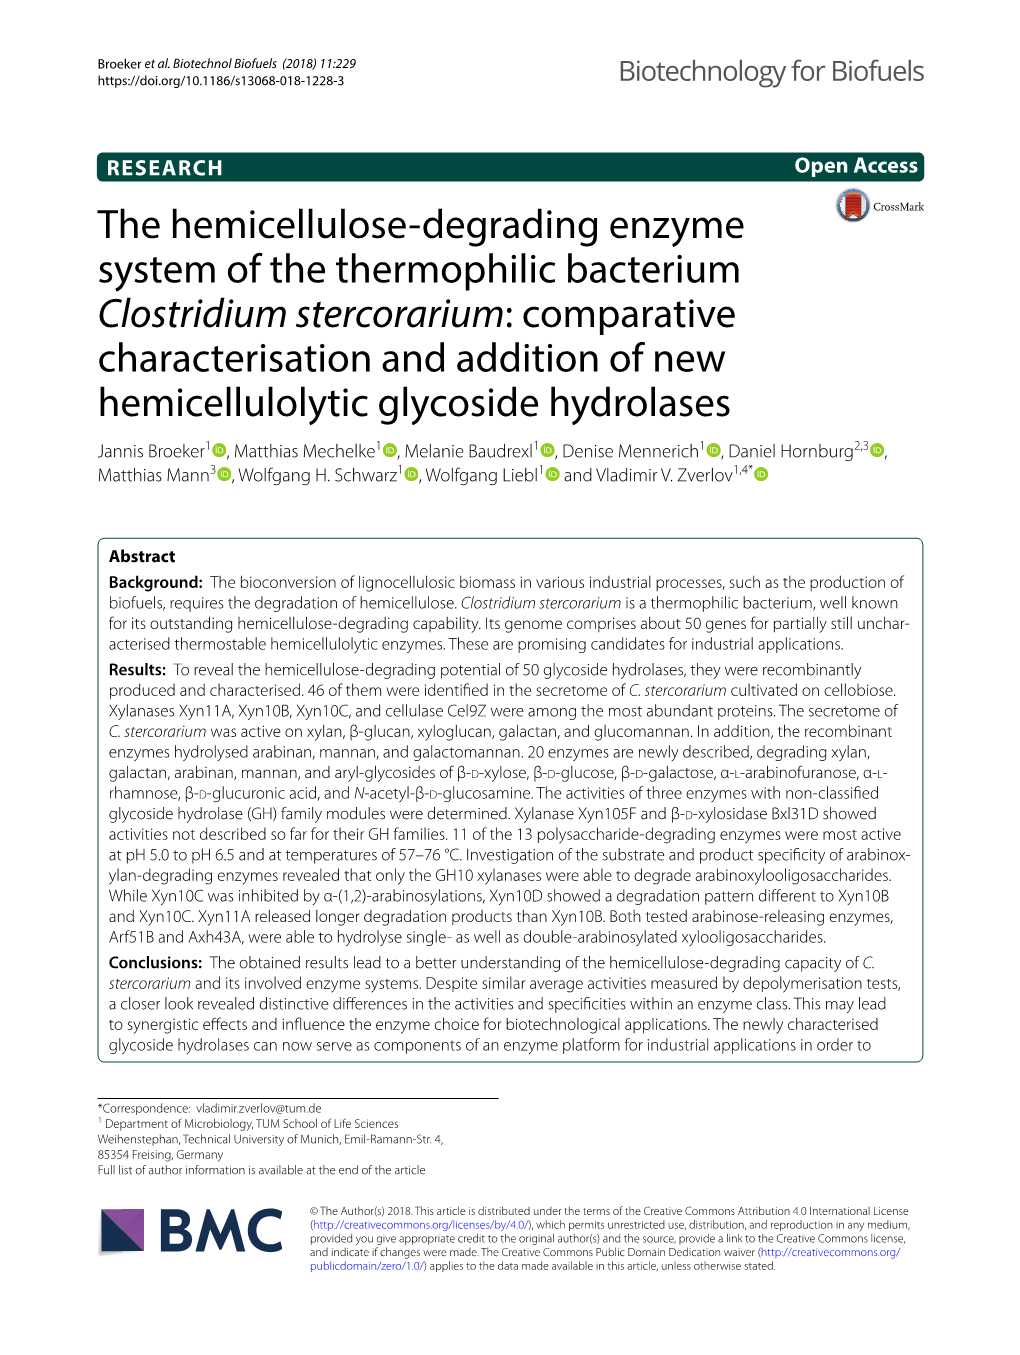 The Hemicellulose-Degrading Enzyme System of the Thermophilic